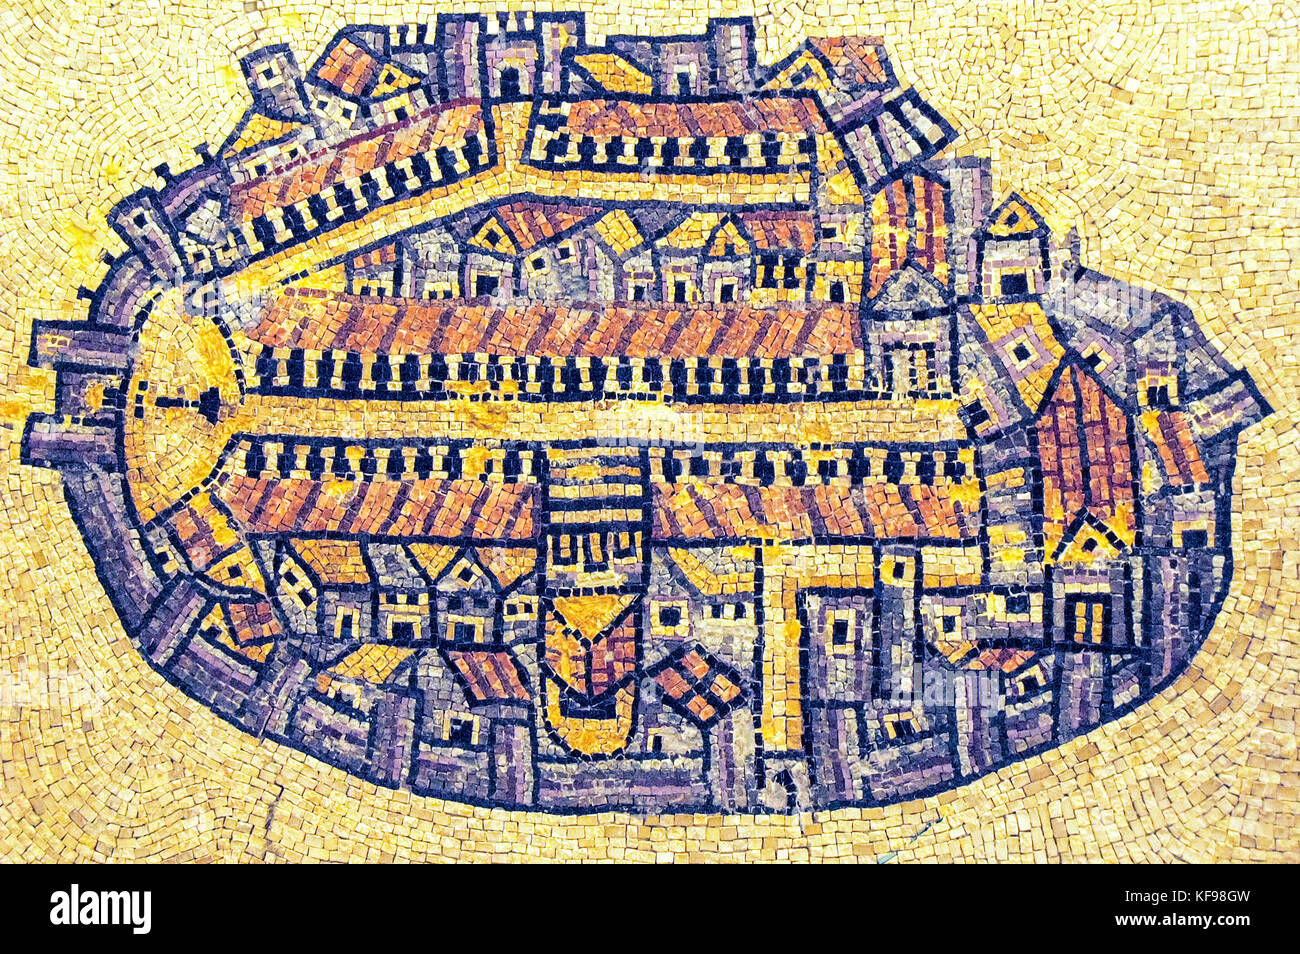 Israel, Jerusalem, The Madaba Map, a Byzantine mosaic map of the old city walled city of Jerusalem with the cardo running from north to south Stock Photo